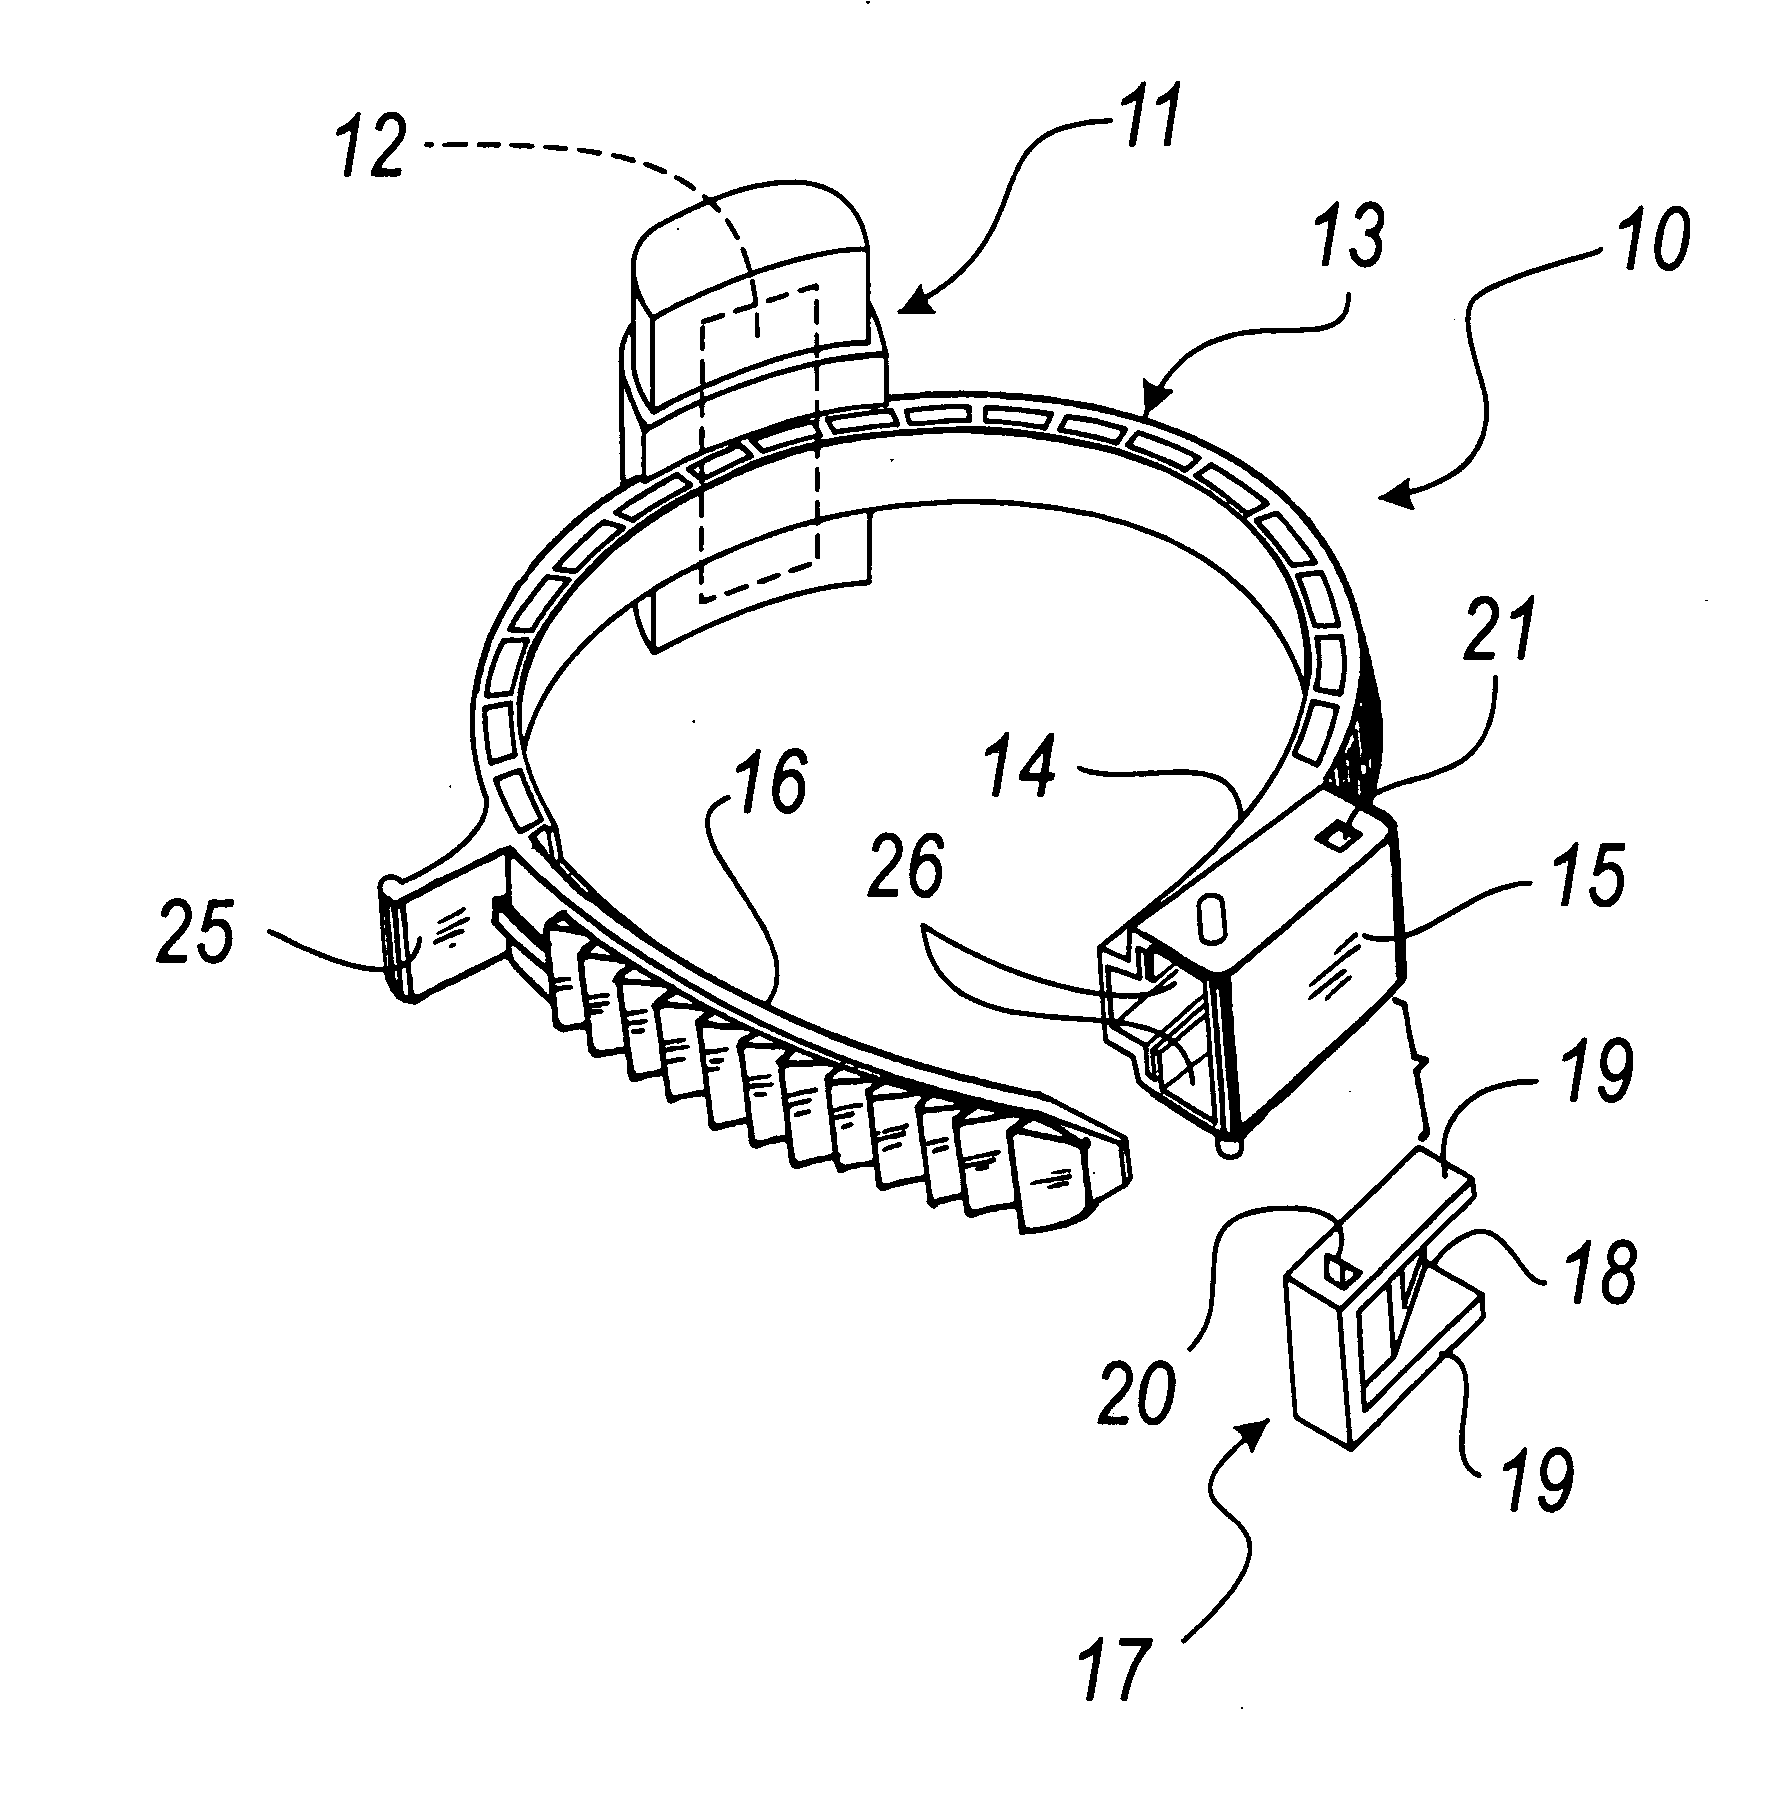 Anti-theft device for items having portions that can be surrounded by straps or the like